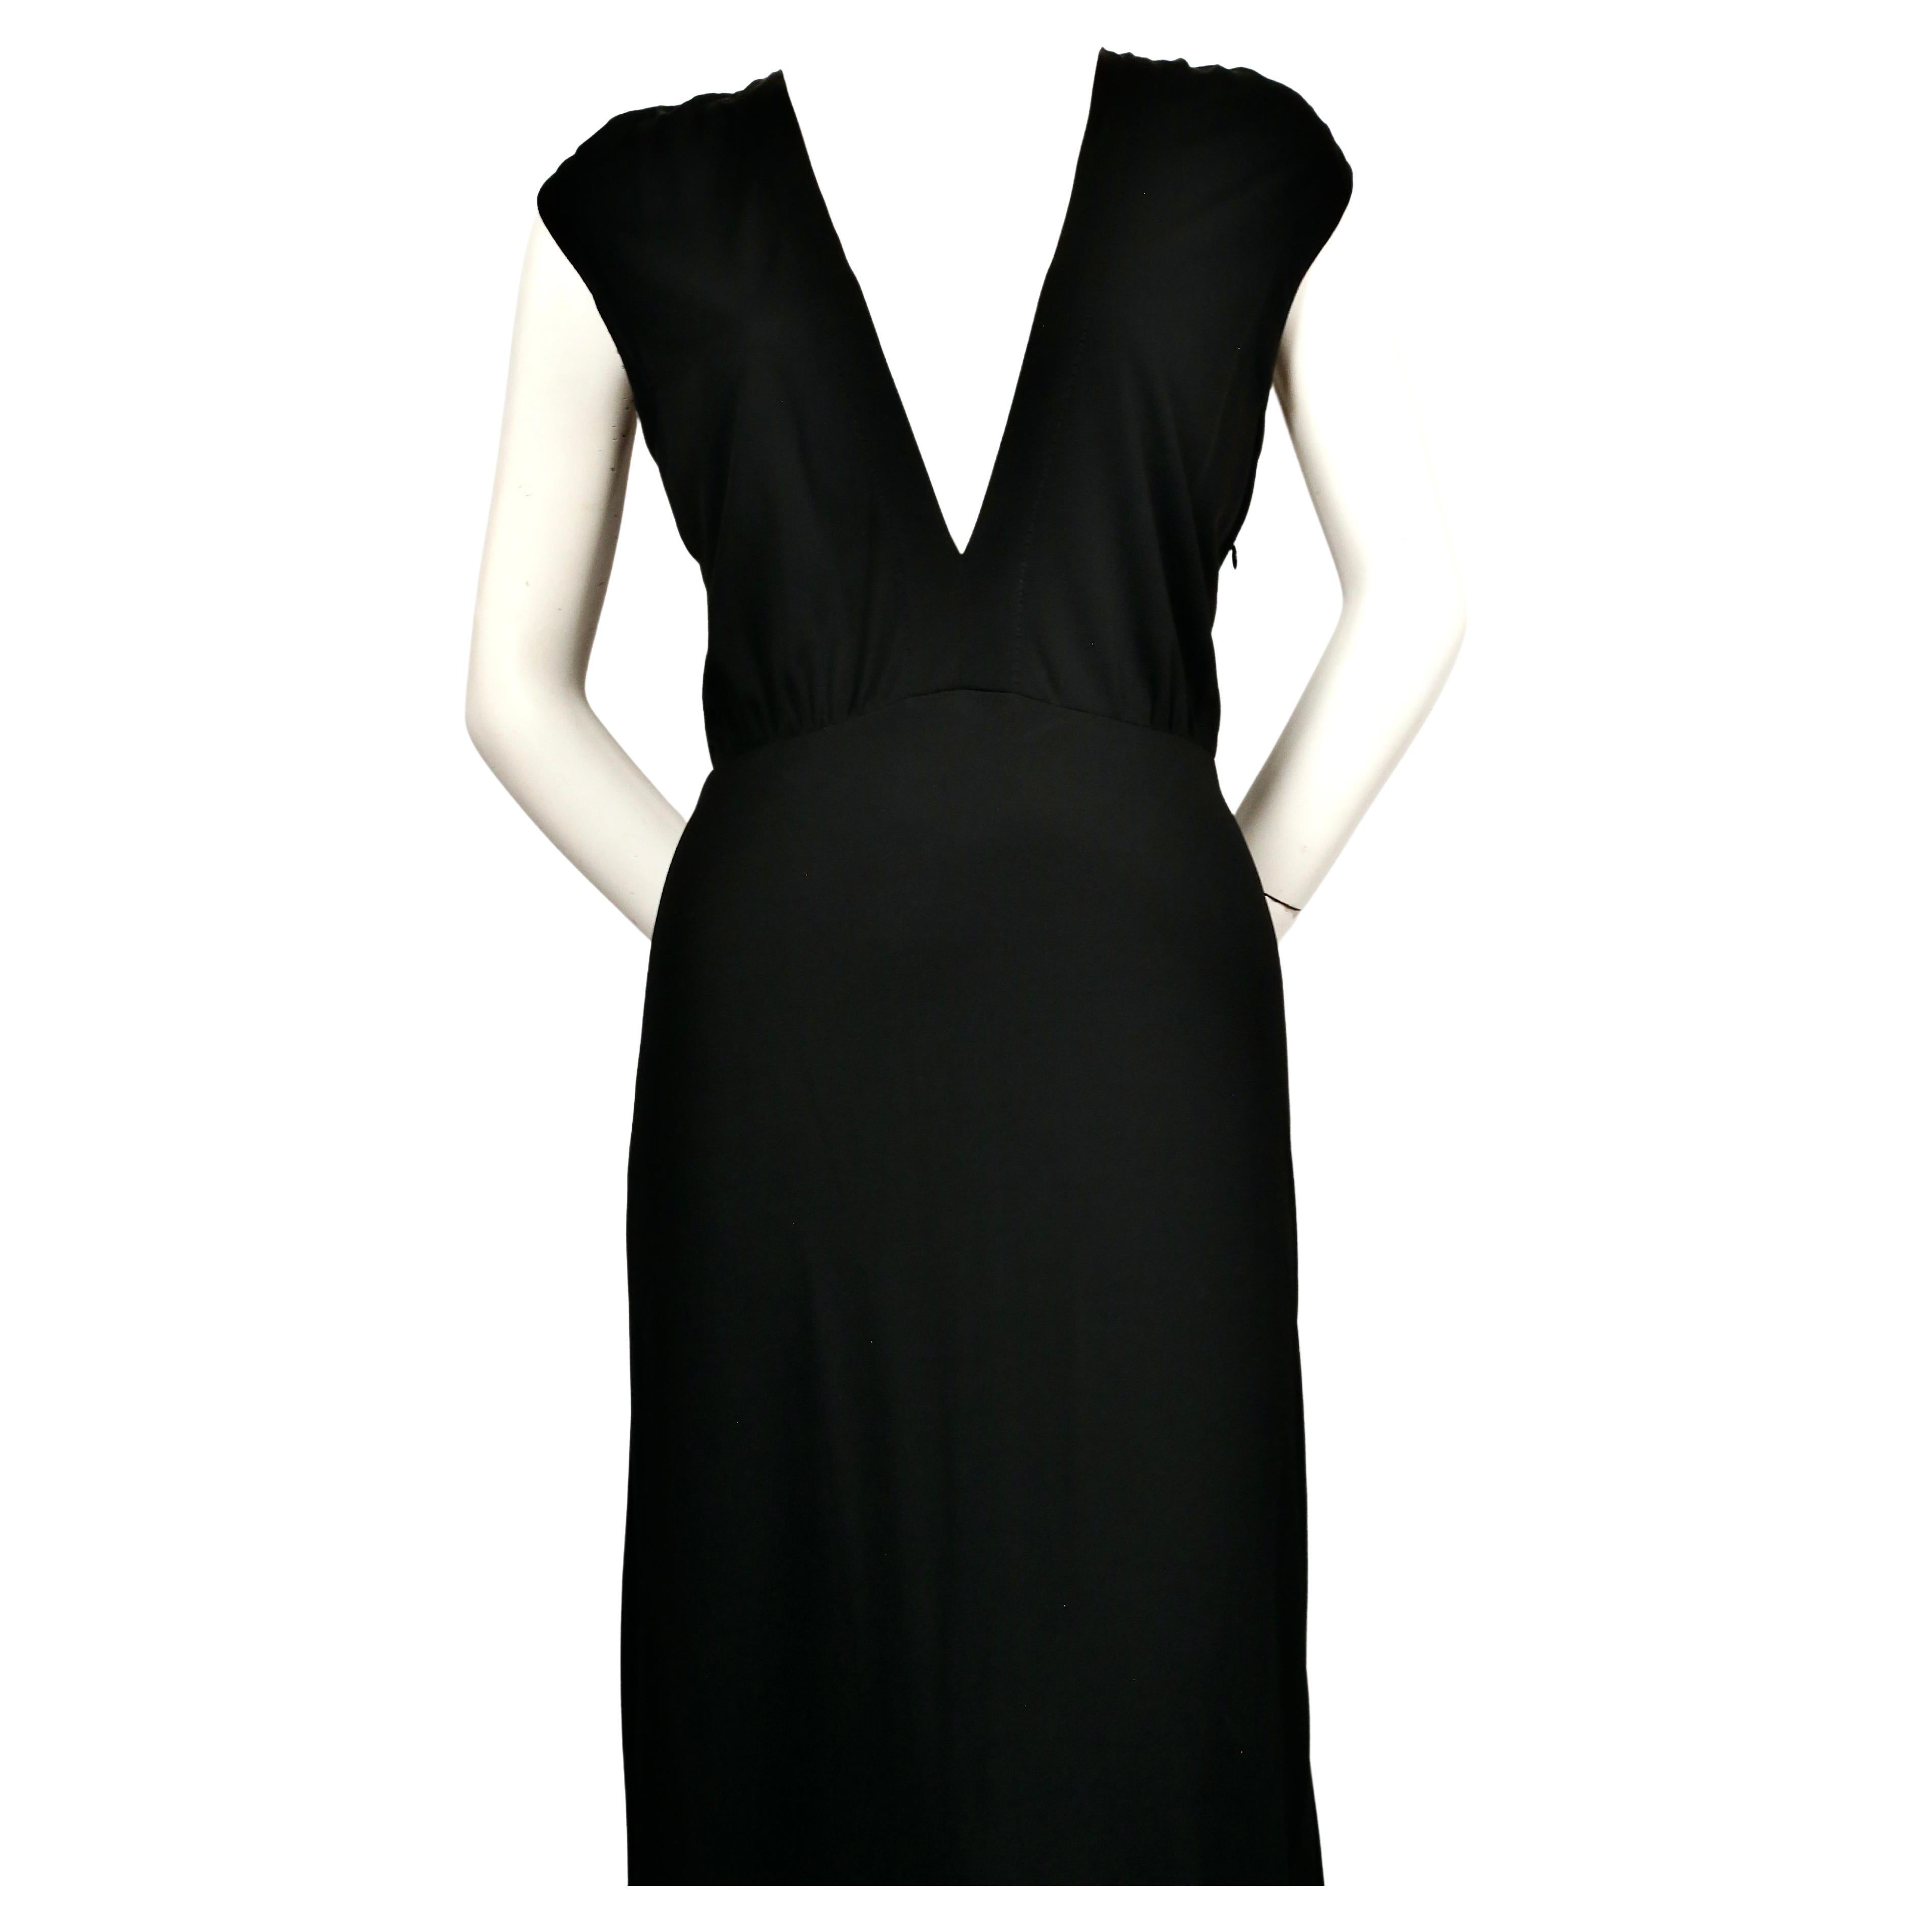 Jet-black jersey '1970's evening dress' designed by Margiela from the 'Replica' line dating to the early 2000’s although an almost identical dress was seen on the spring 1995 runway in white. Deep 'V' neckline and ruching at shoulders. No size is